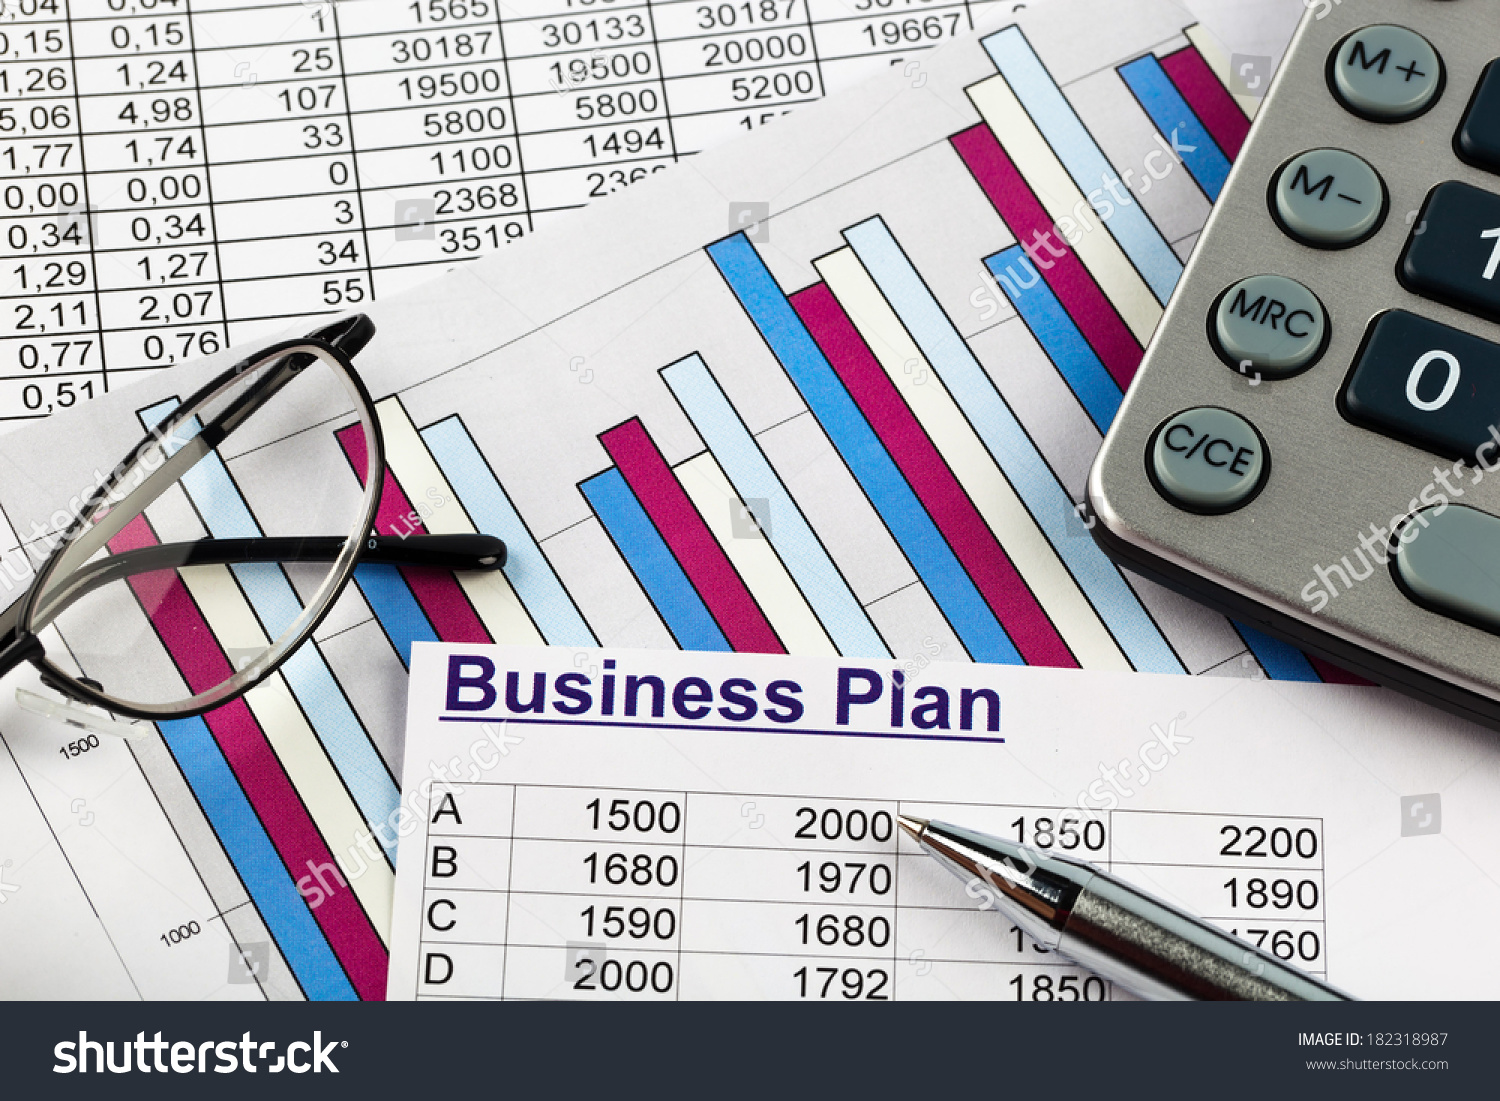 prepare a business plan for self-employment